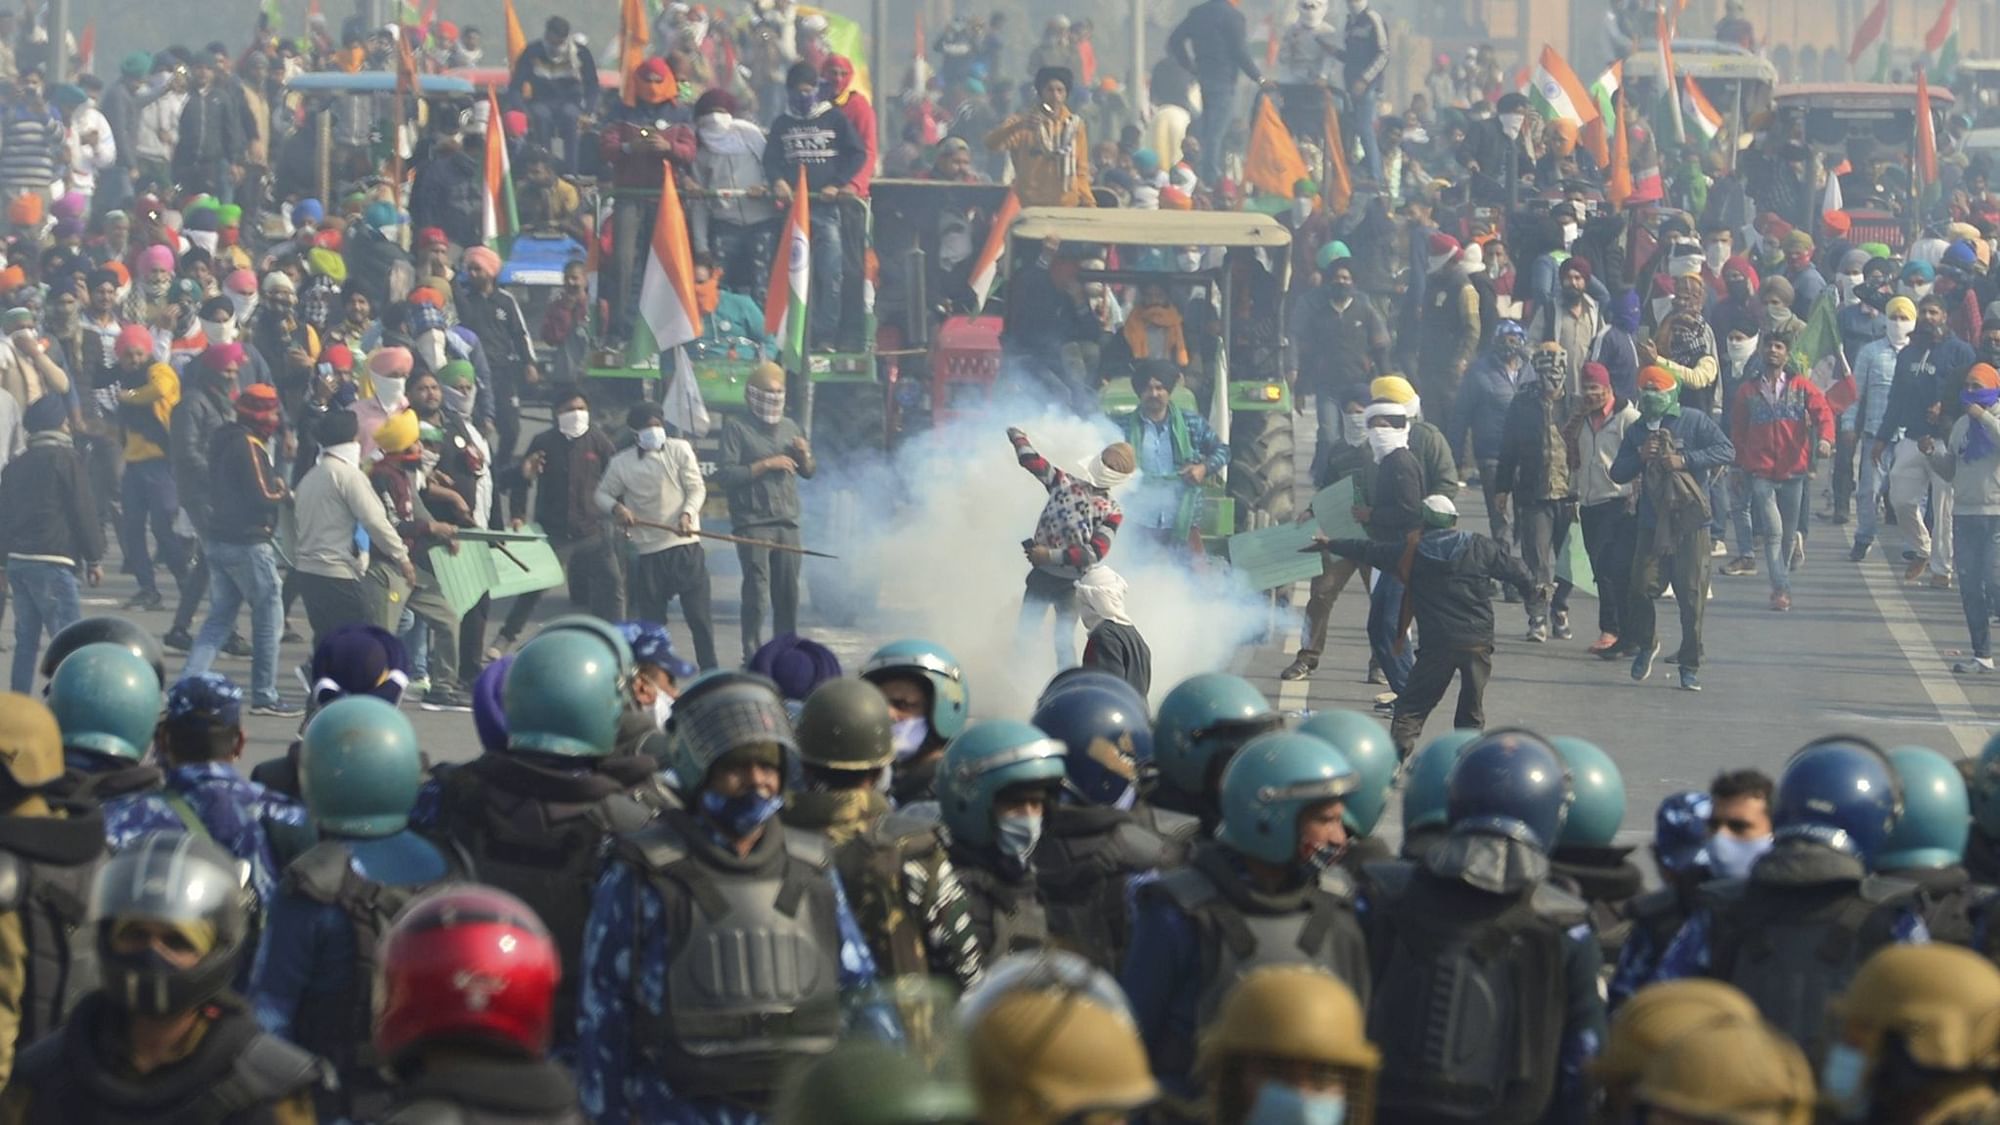 Police uses tear gas to disperse farmers attempting to break barricades at Ghazipur border during their ‘Kisan Gantantra Parade’, on the occasion of 72nd Republic Day.